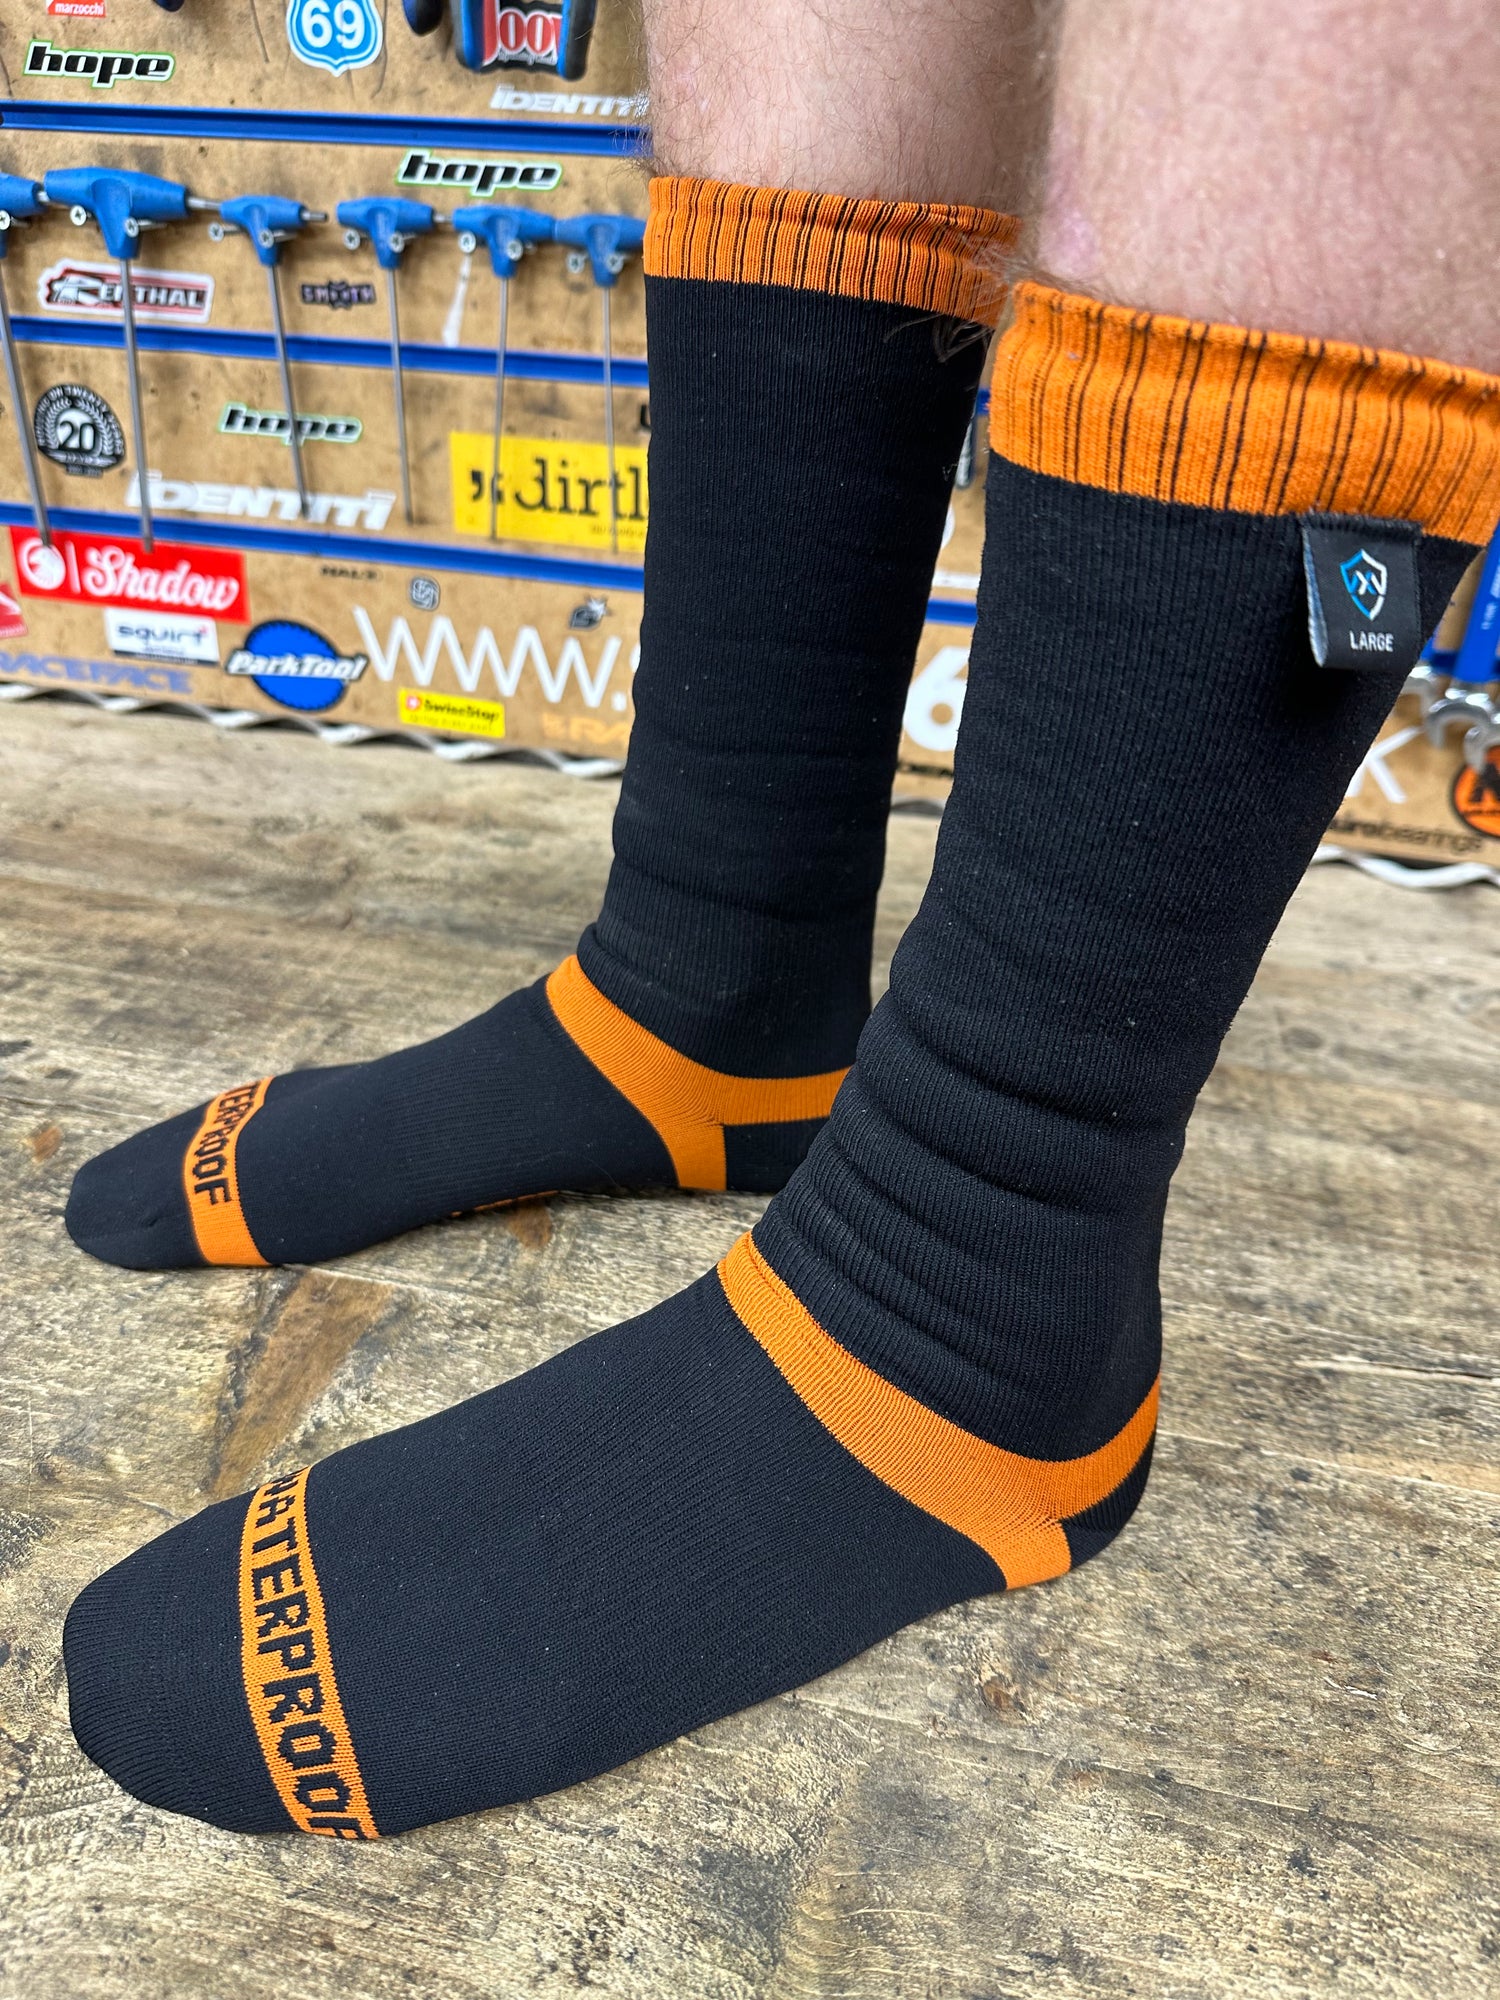 Dexshelll Thermal and Waterproof socks - Perfect for riding through winter